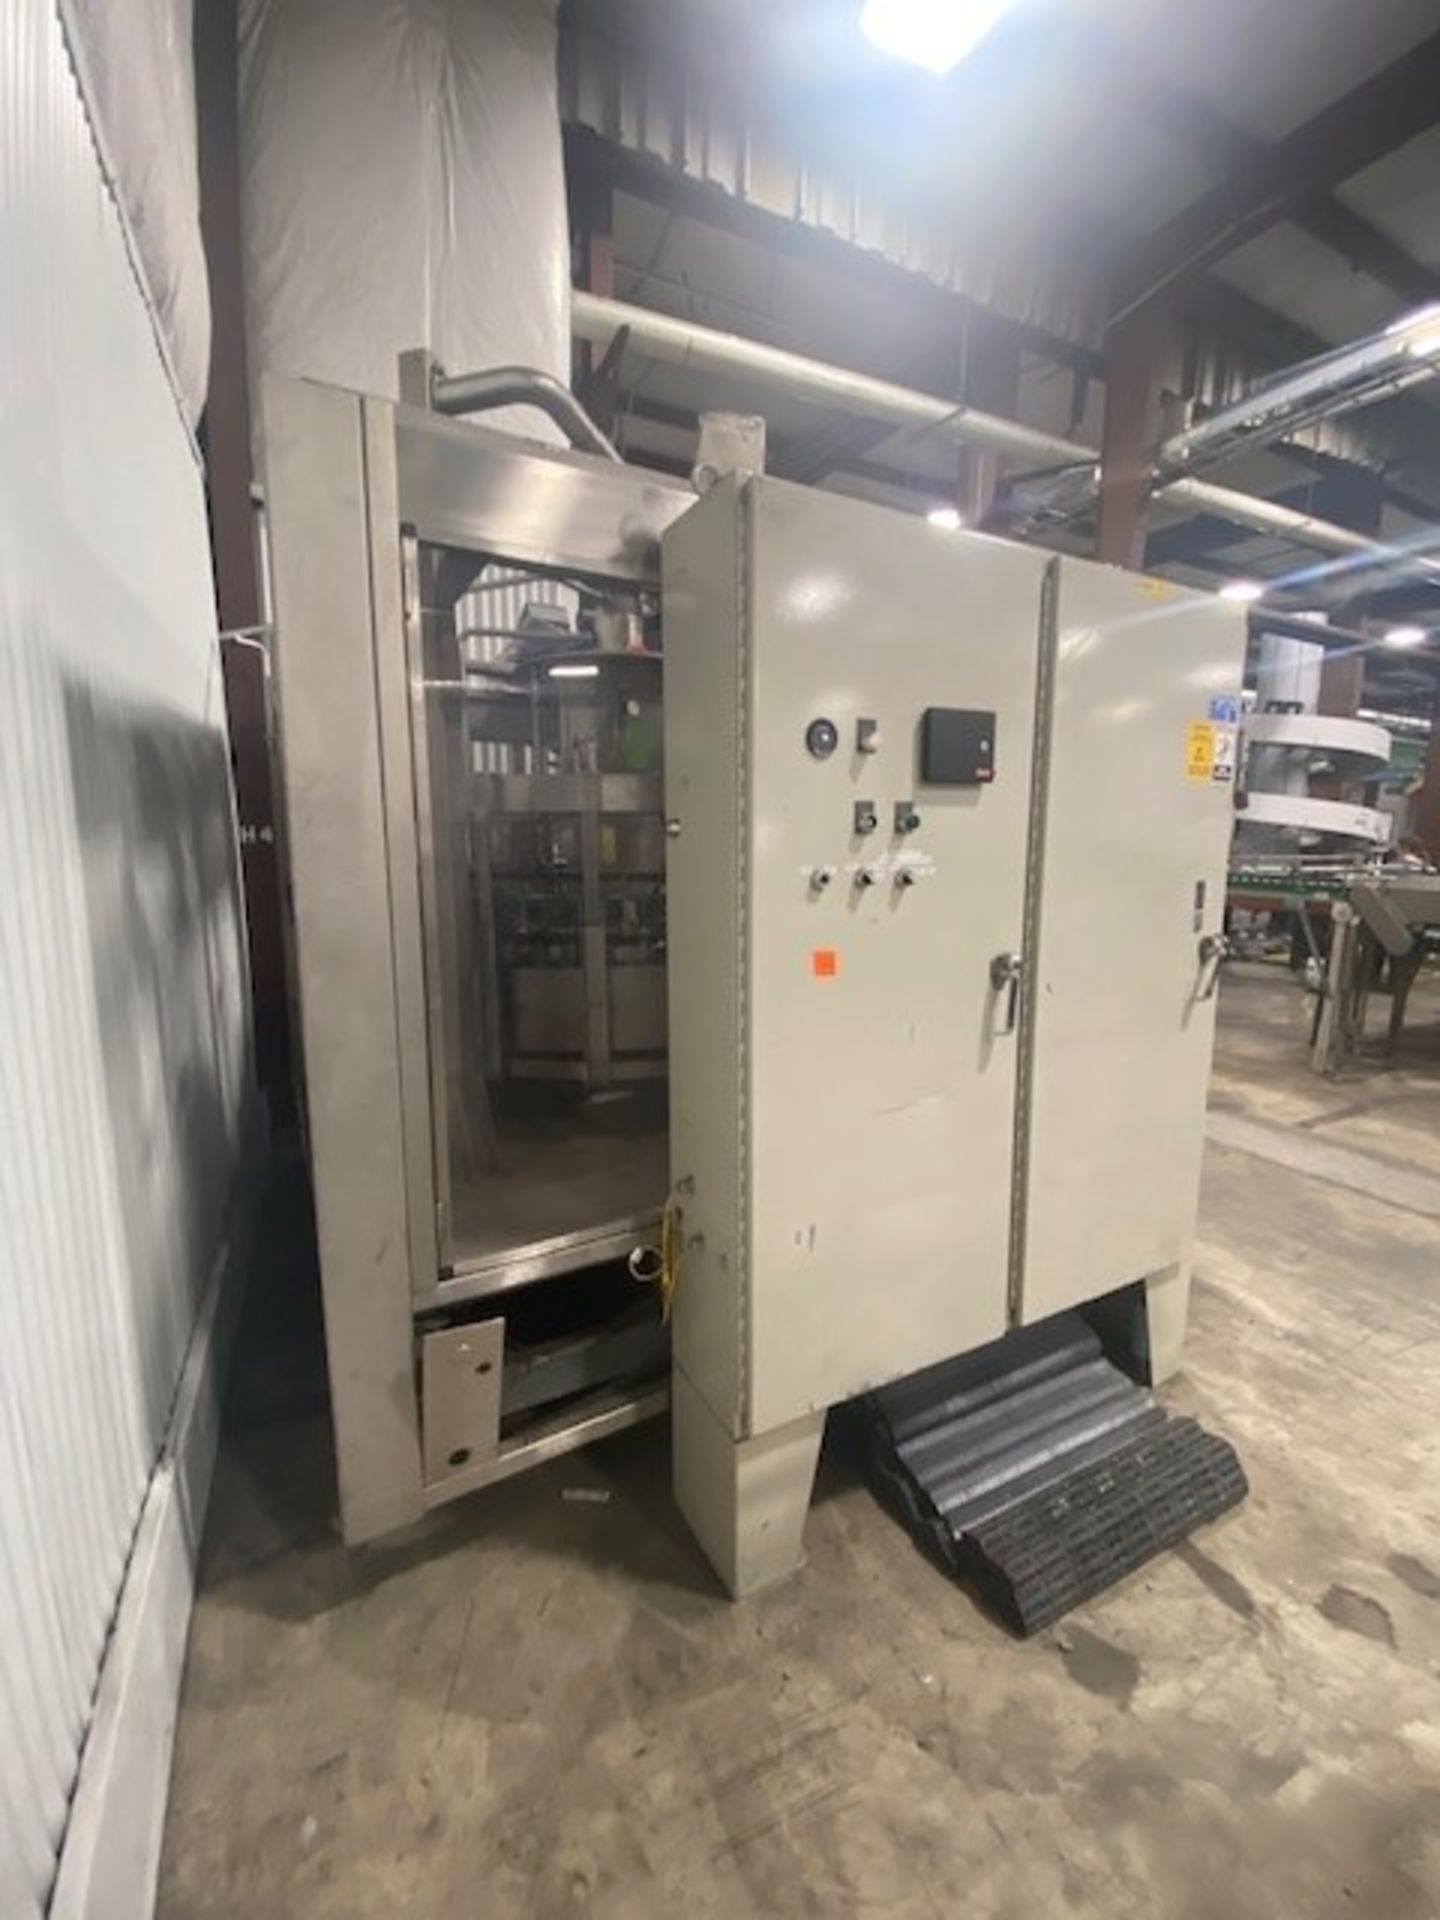 Krones VarioJet Rinser, S/N 562-256, 480 Volts, 3 Phase, with Double Door Control Cabinet, with - Image 13 of 21